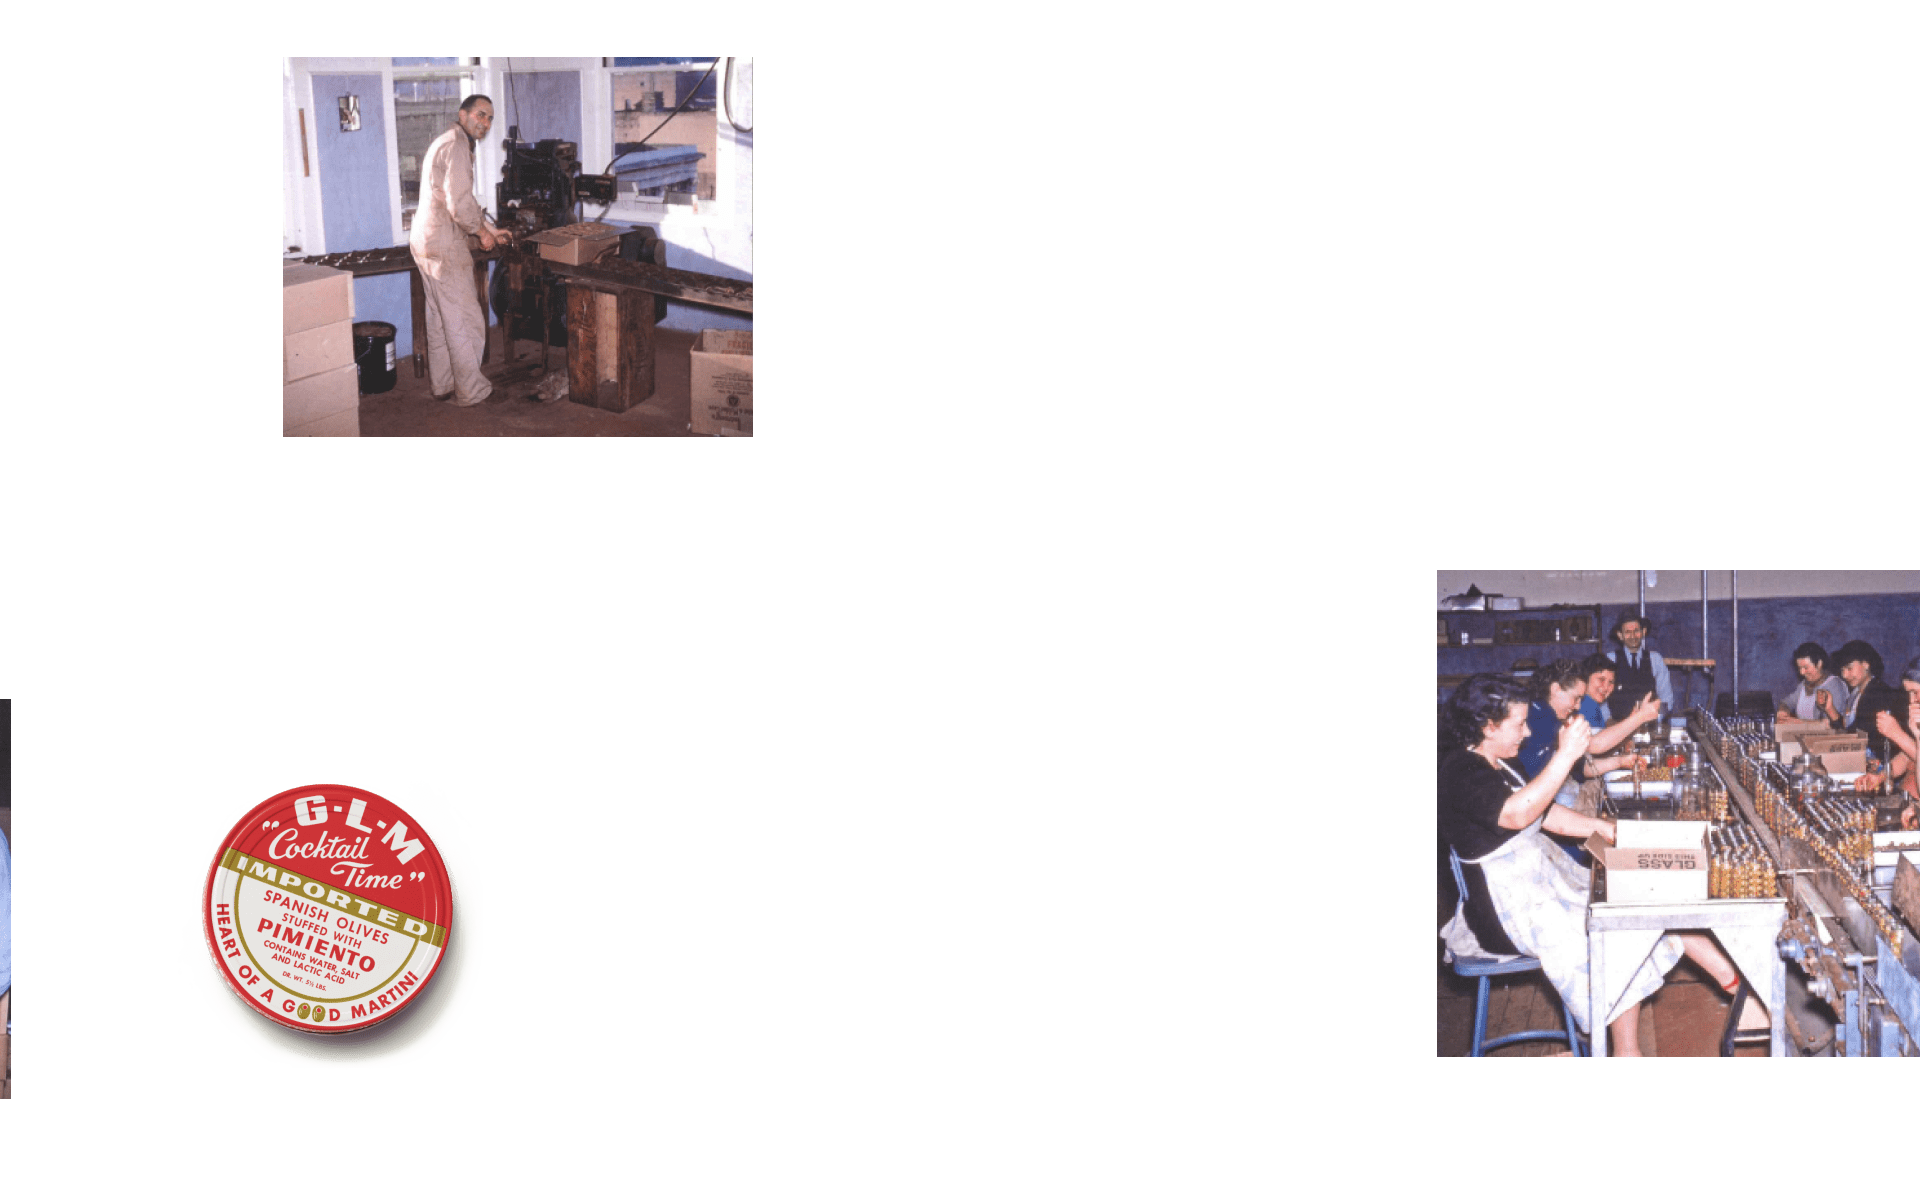 Vintage photos of workers packing Mezzetta products